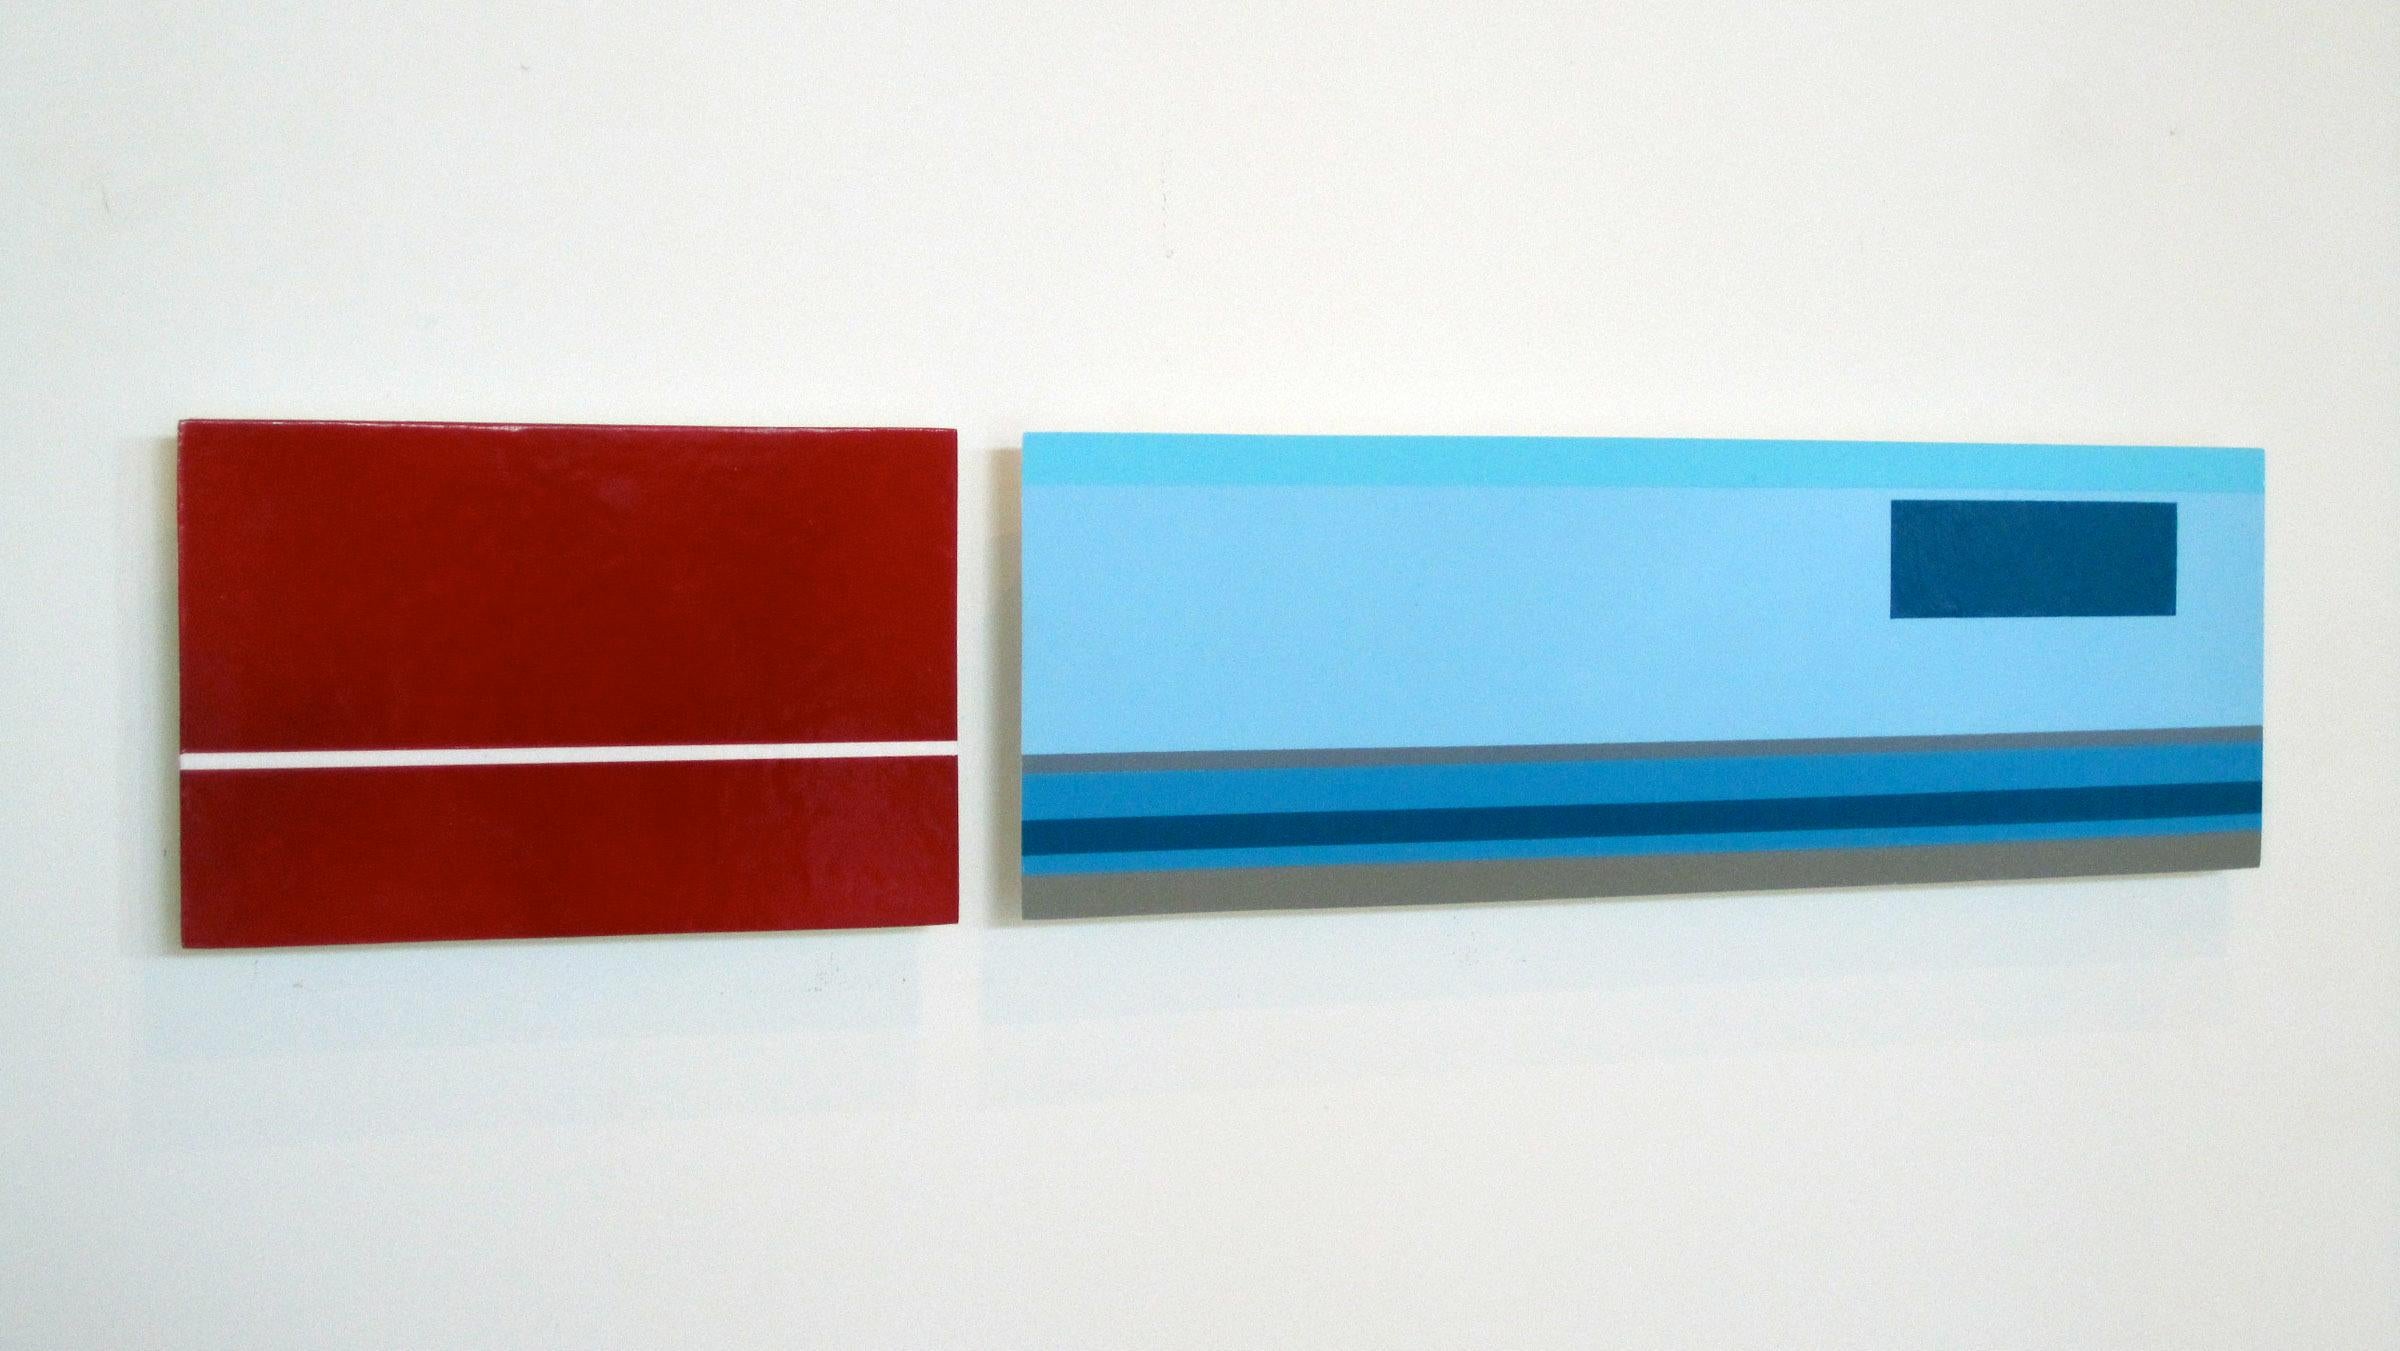 Semi Truck, David E. Peterson, Abstract & Modern Colorful Wooden Wall Sculpture